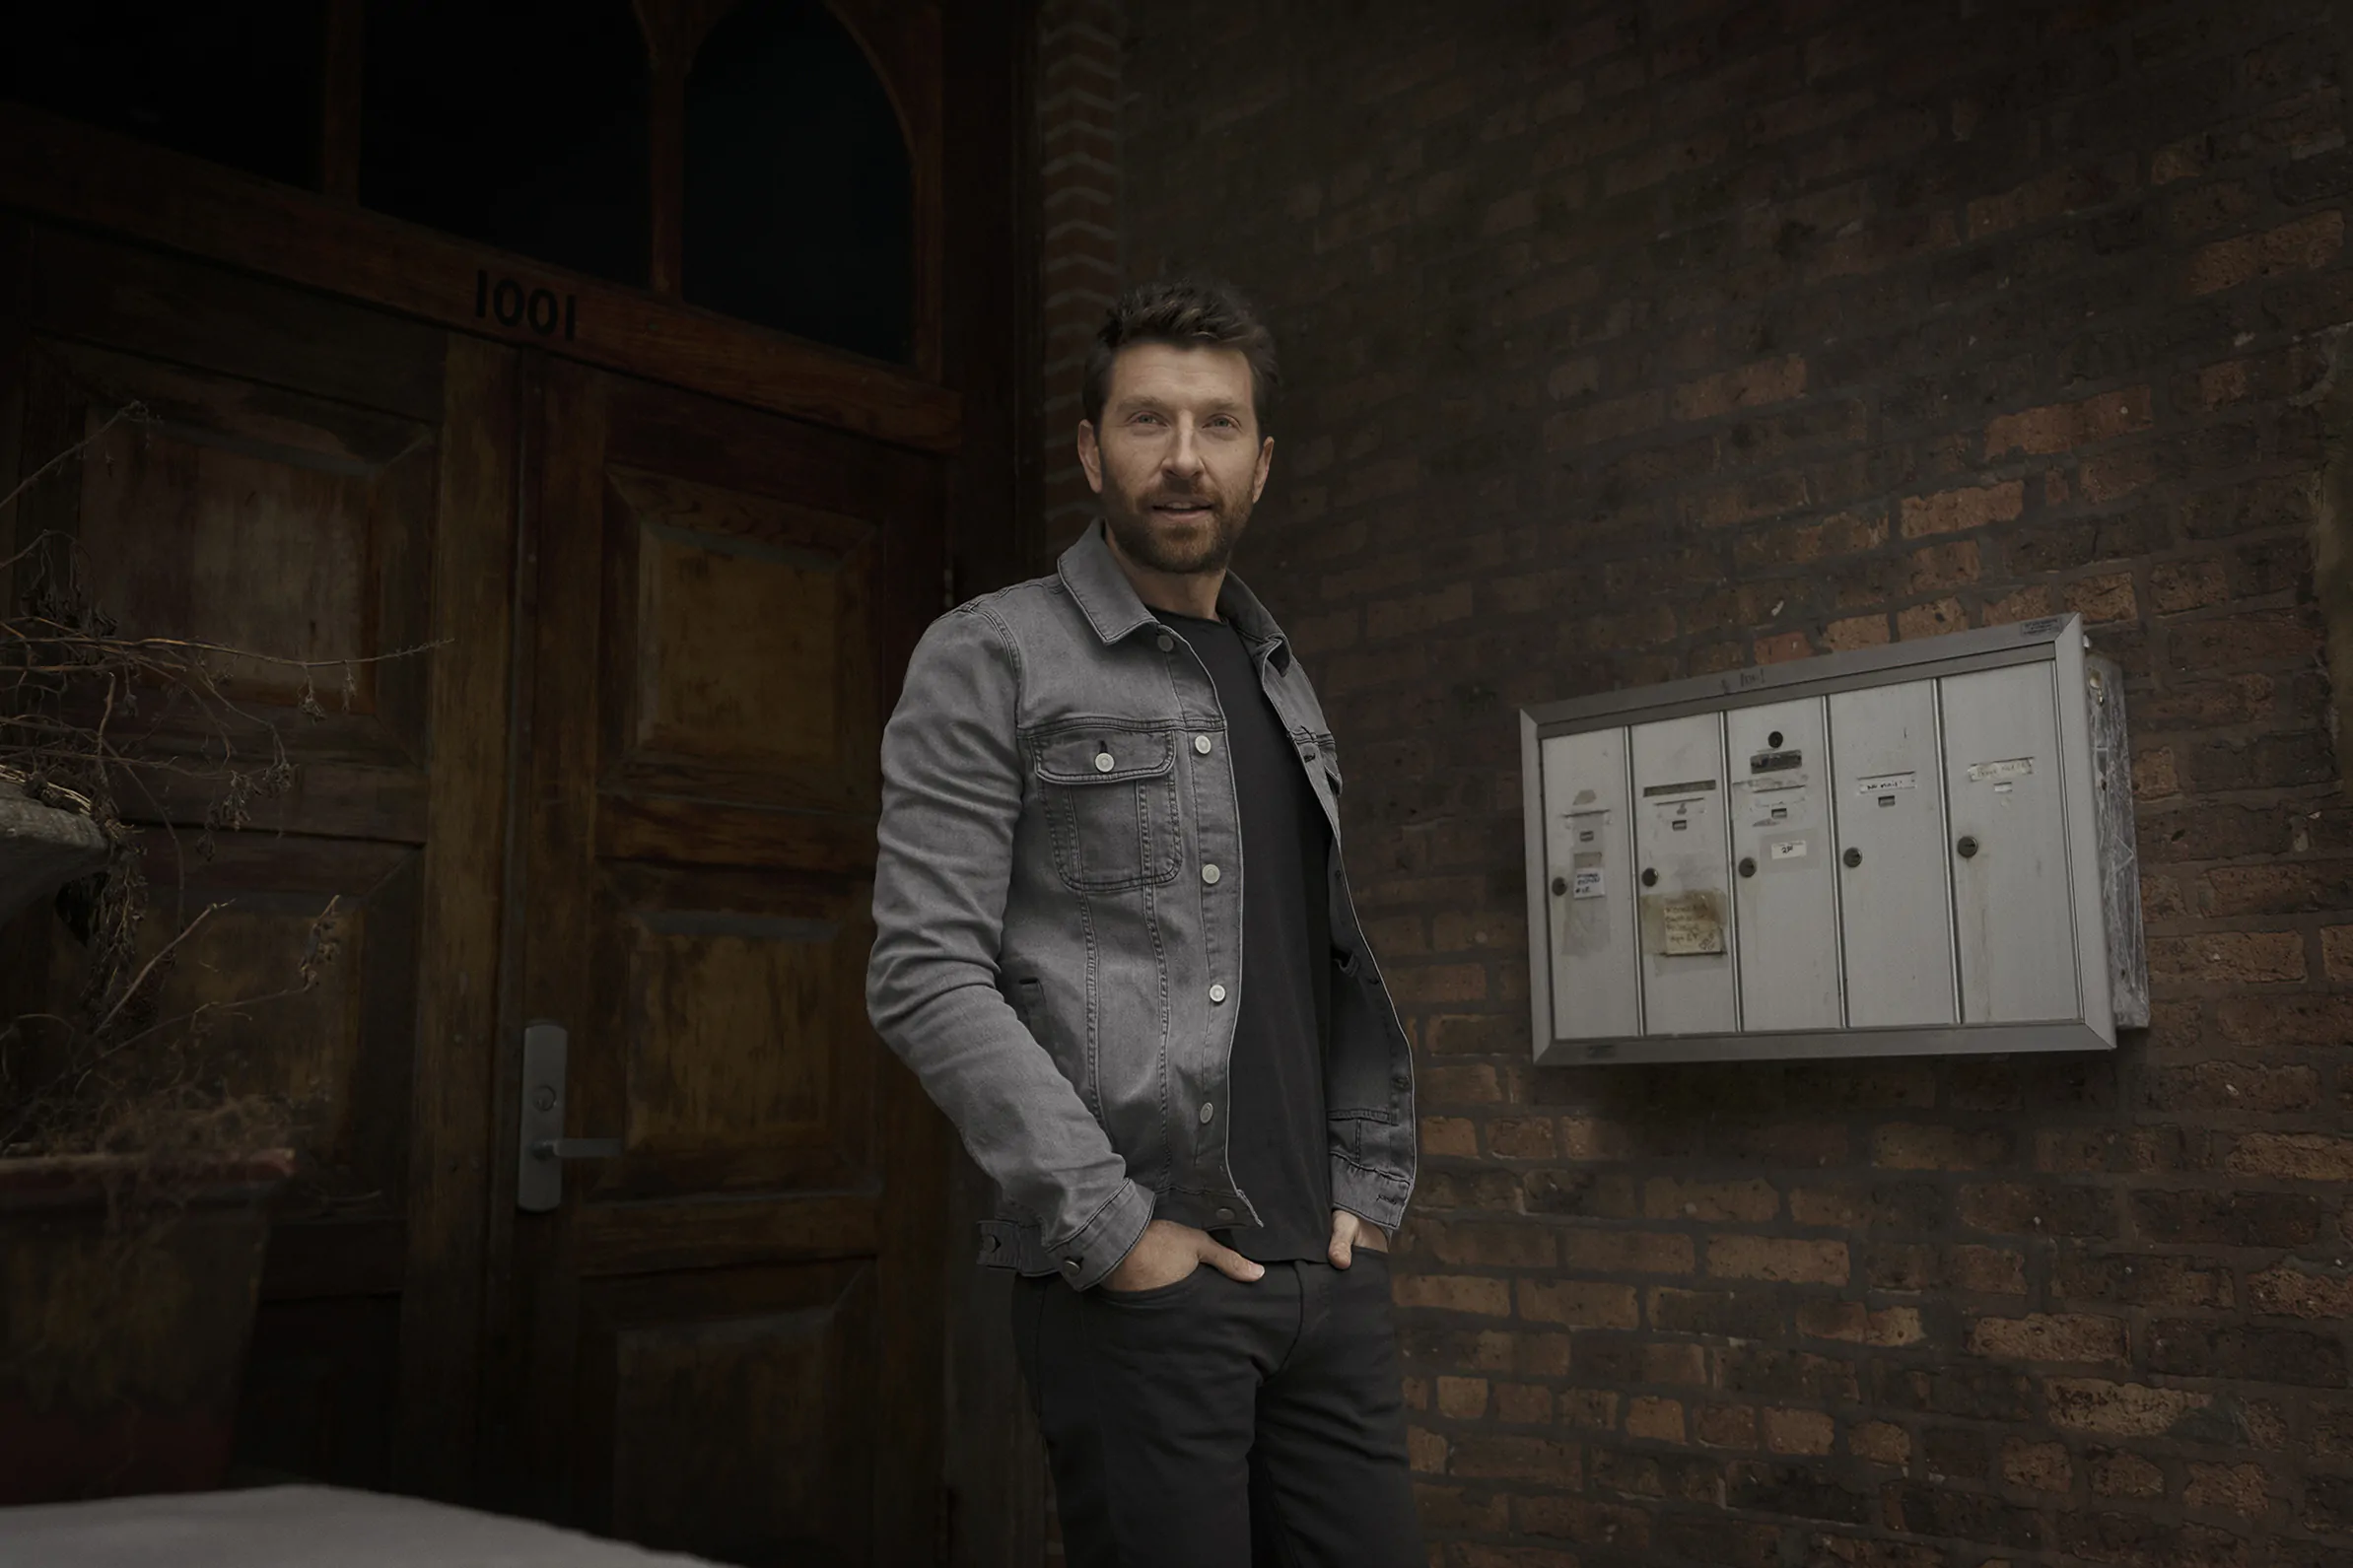 Country superstar BRETT ELDREDGE announces headline show at the Ulster Hall, Belfast on Tuesday 3 May 2022